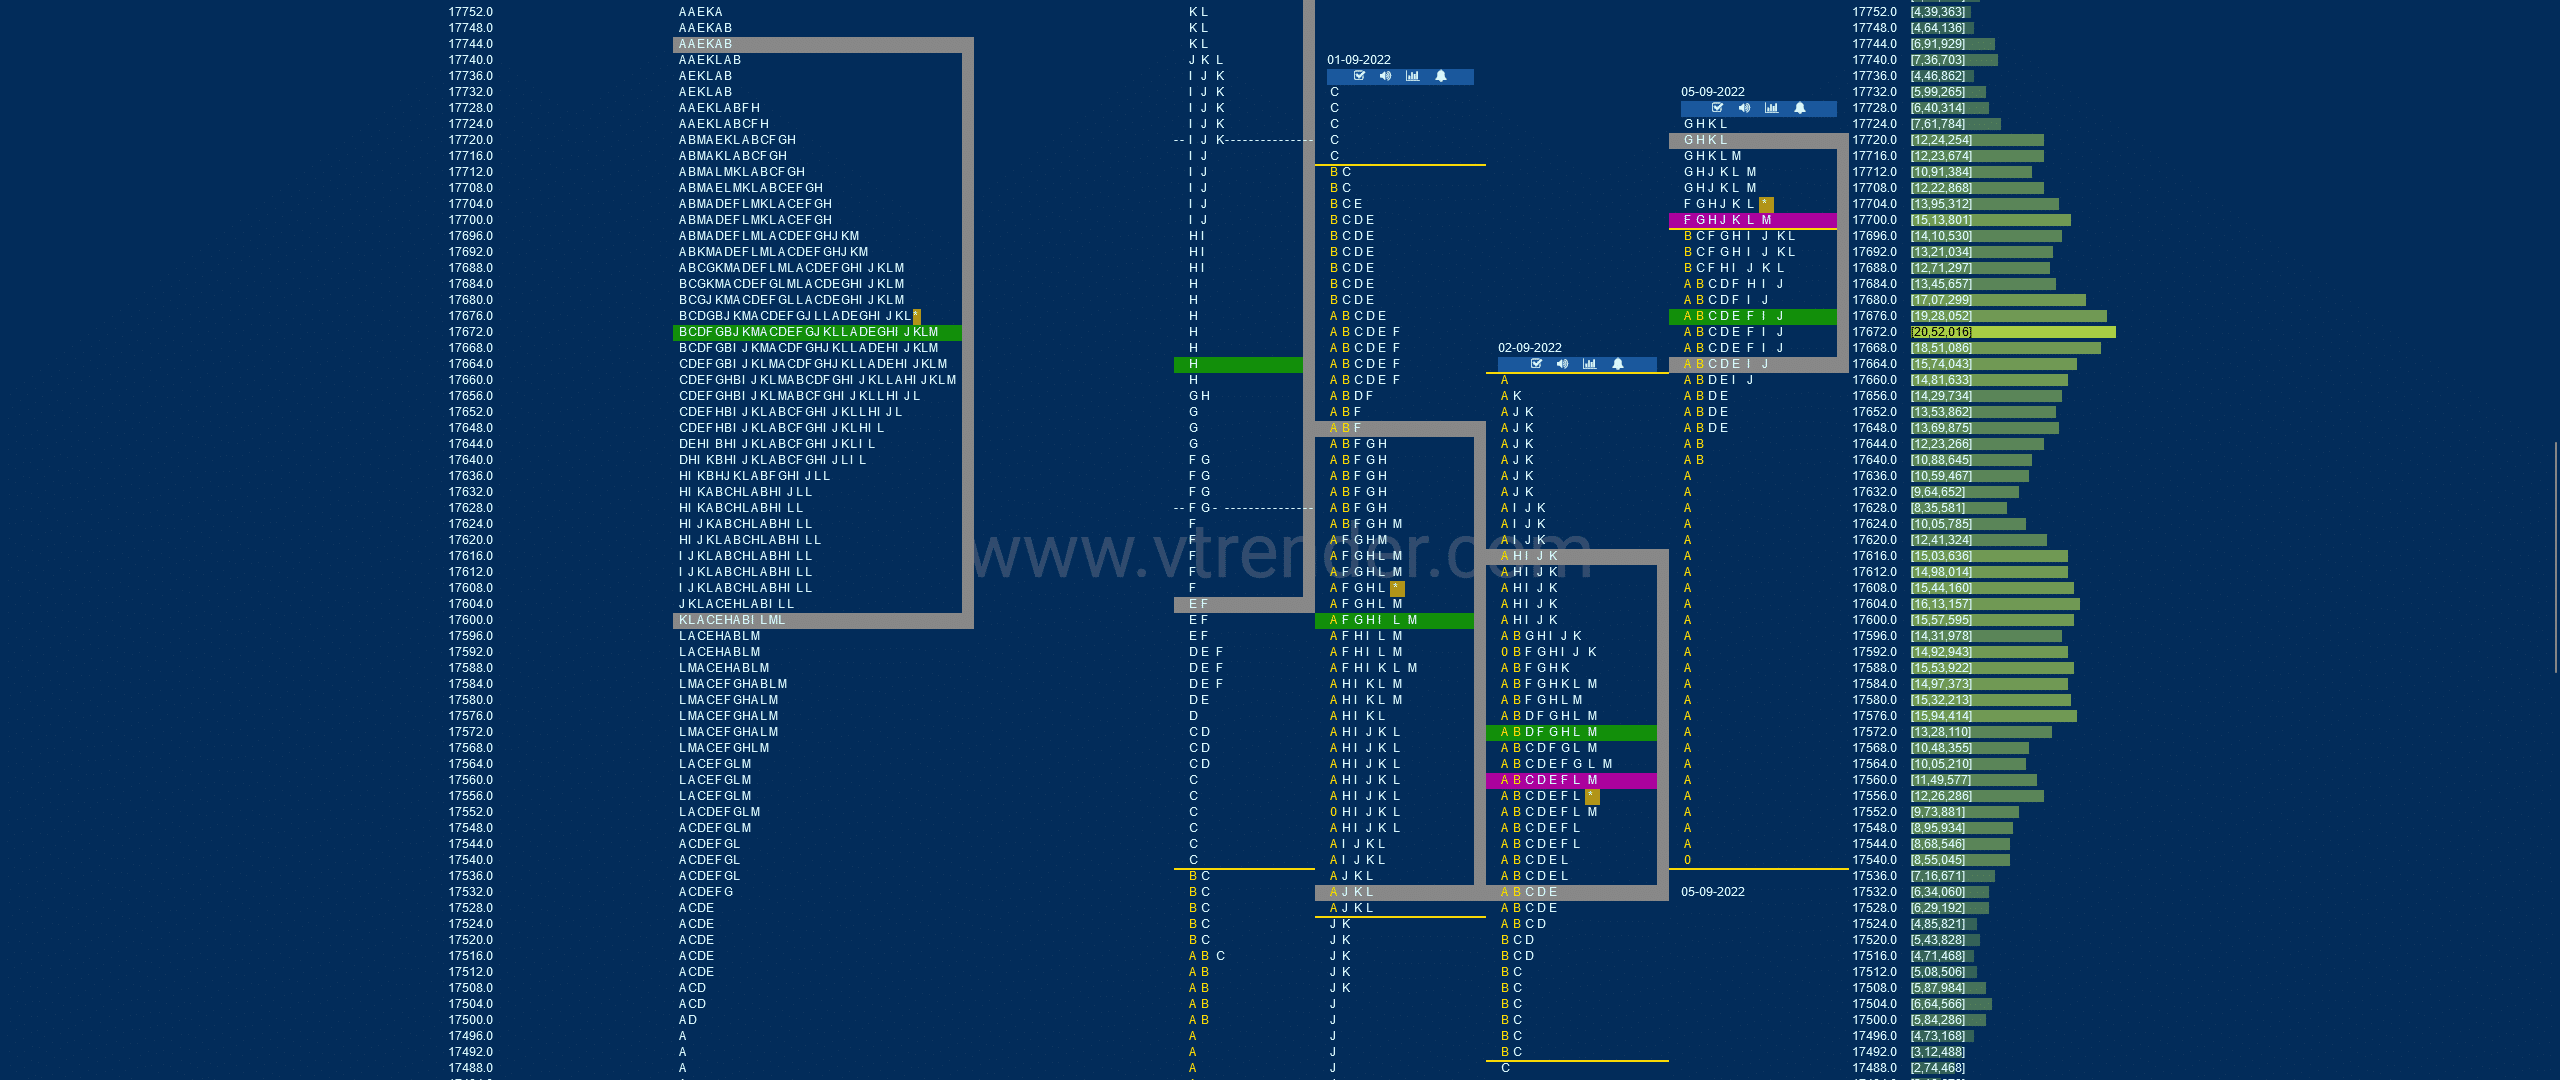 Nf 2 Market Profile Analysis Dated 05Th Sep 2022